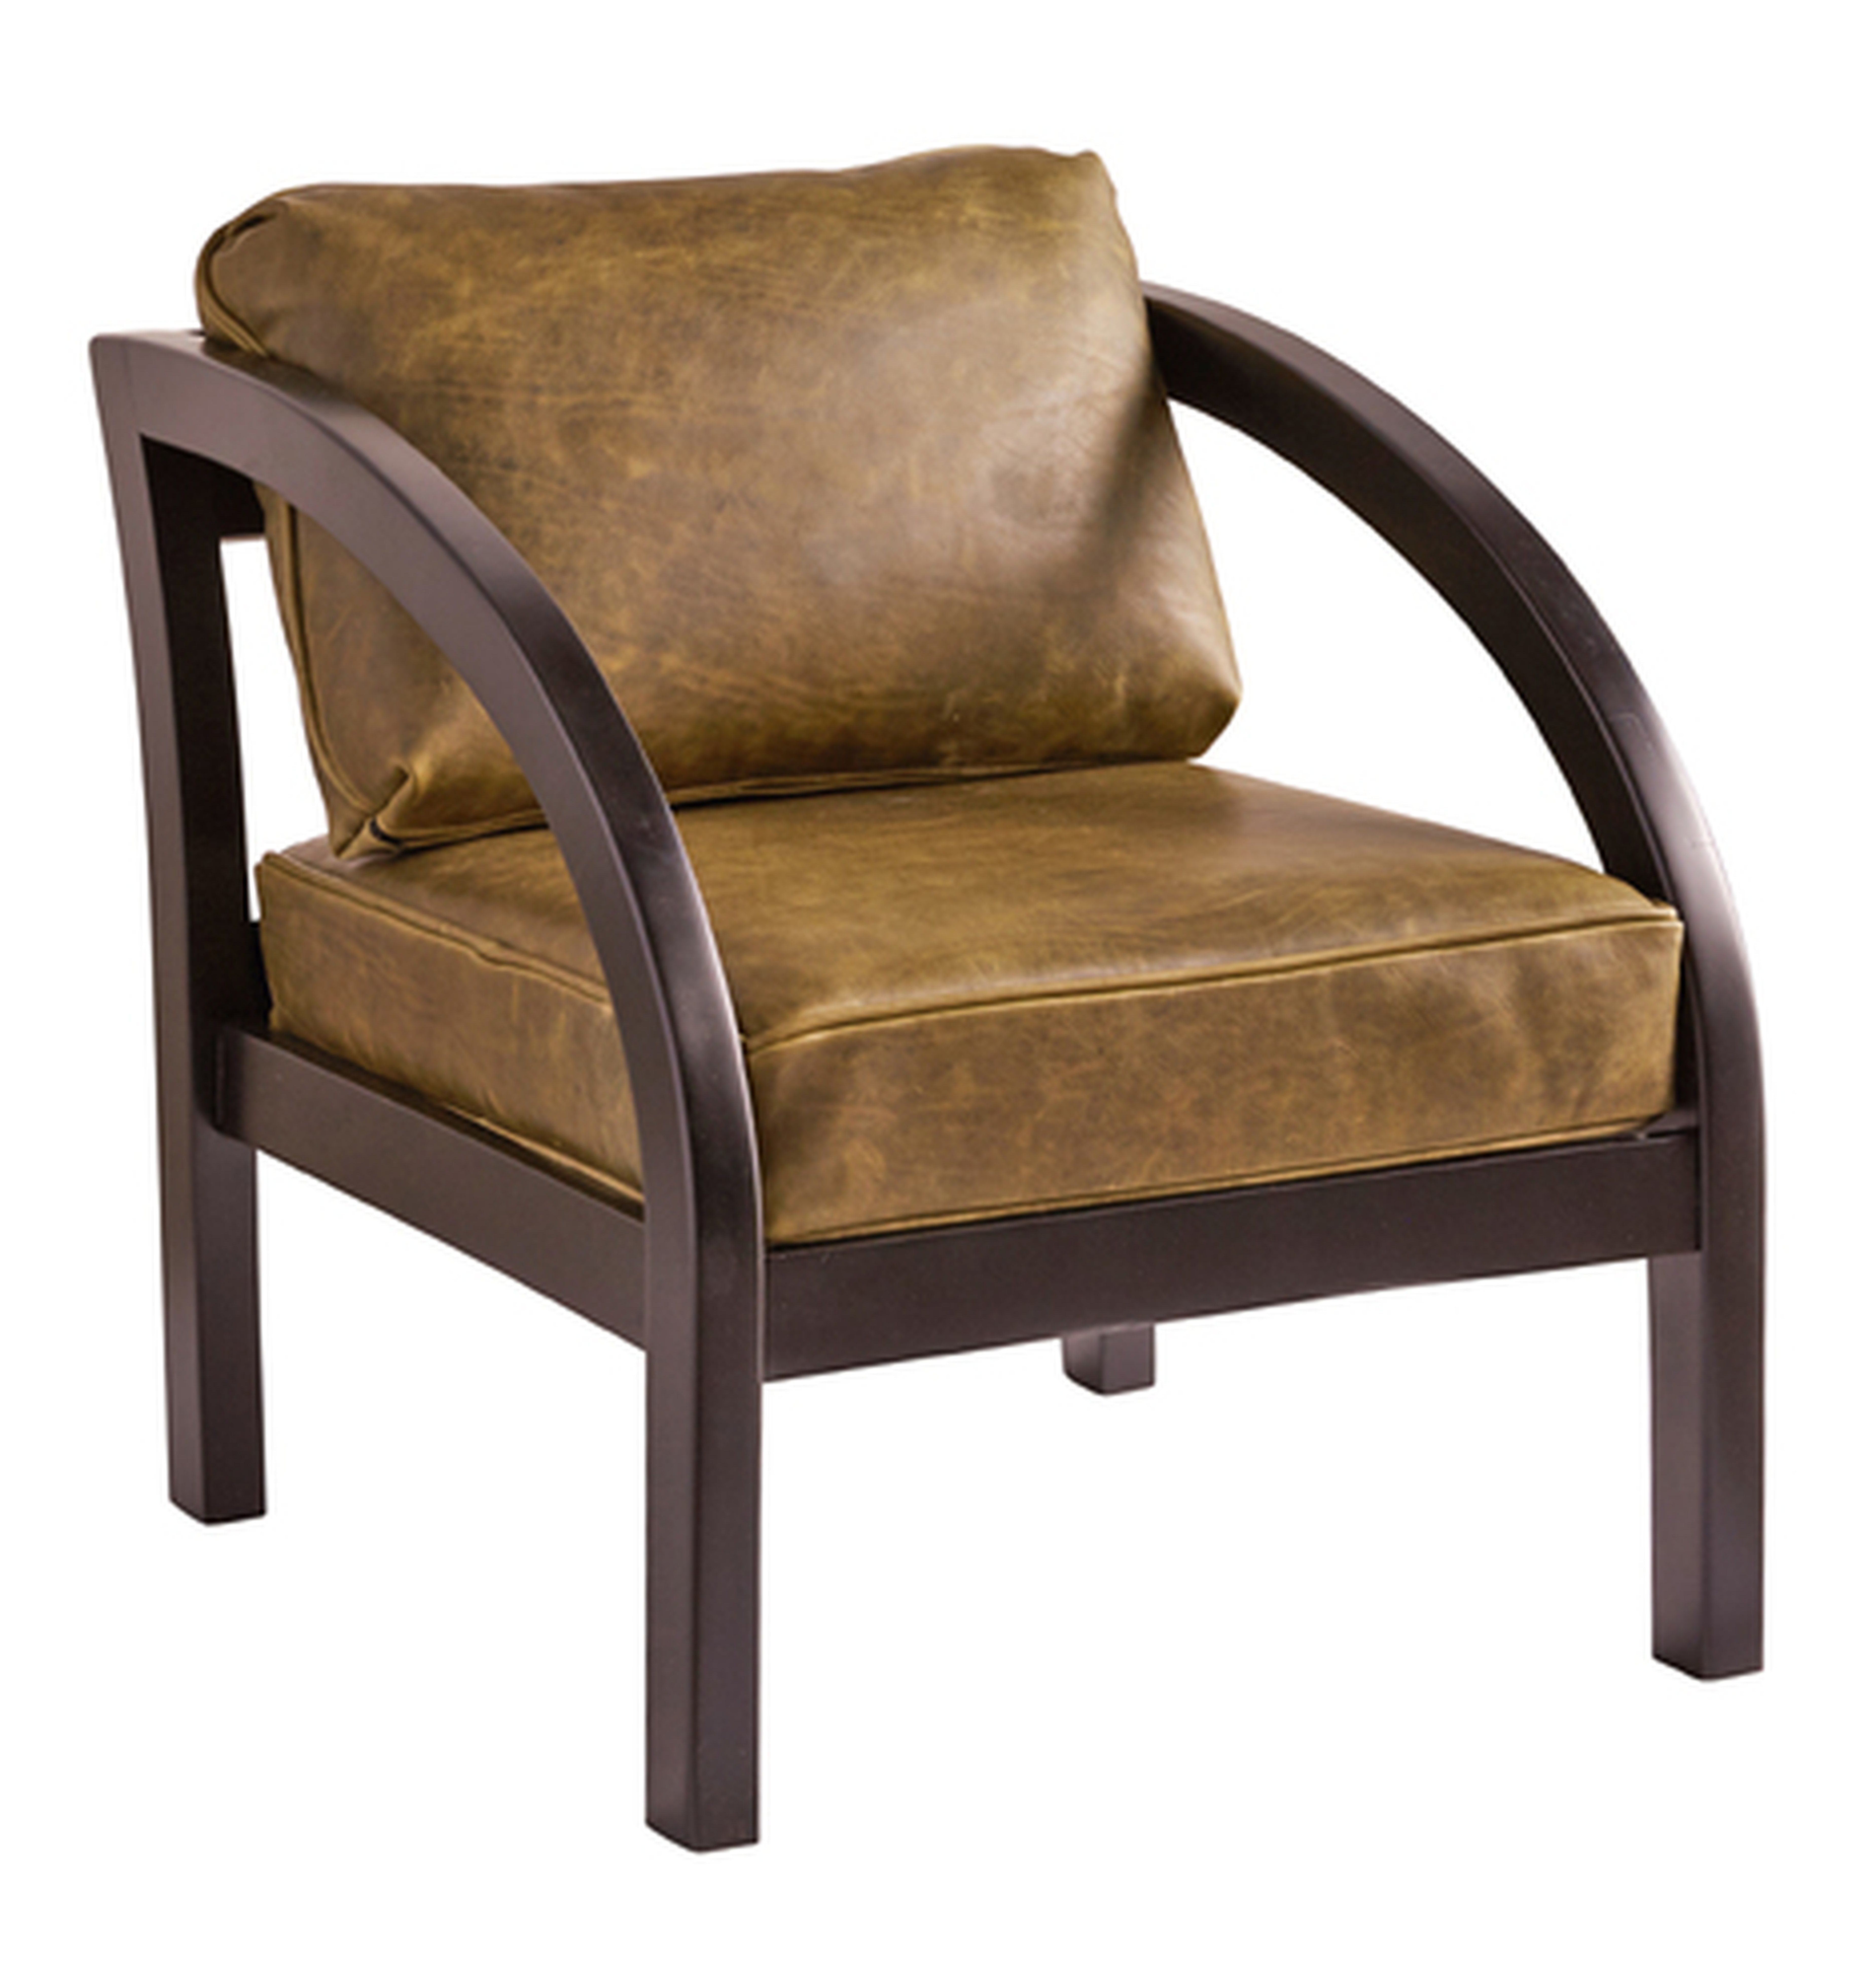 Art Deco Modernage Lounge Chair in Green Leather - Rejuvenation